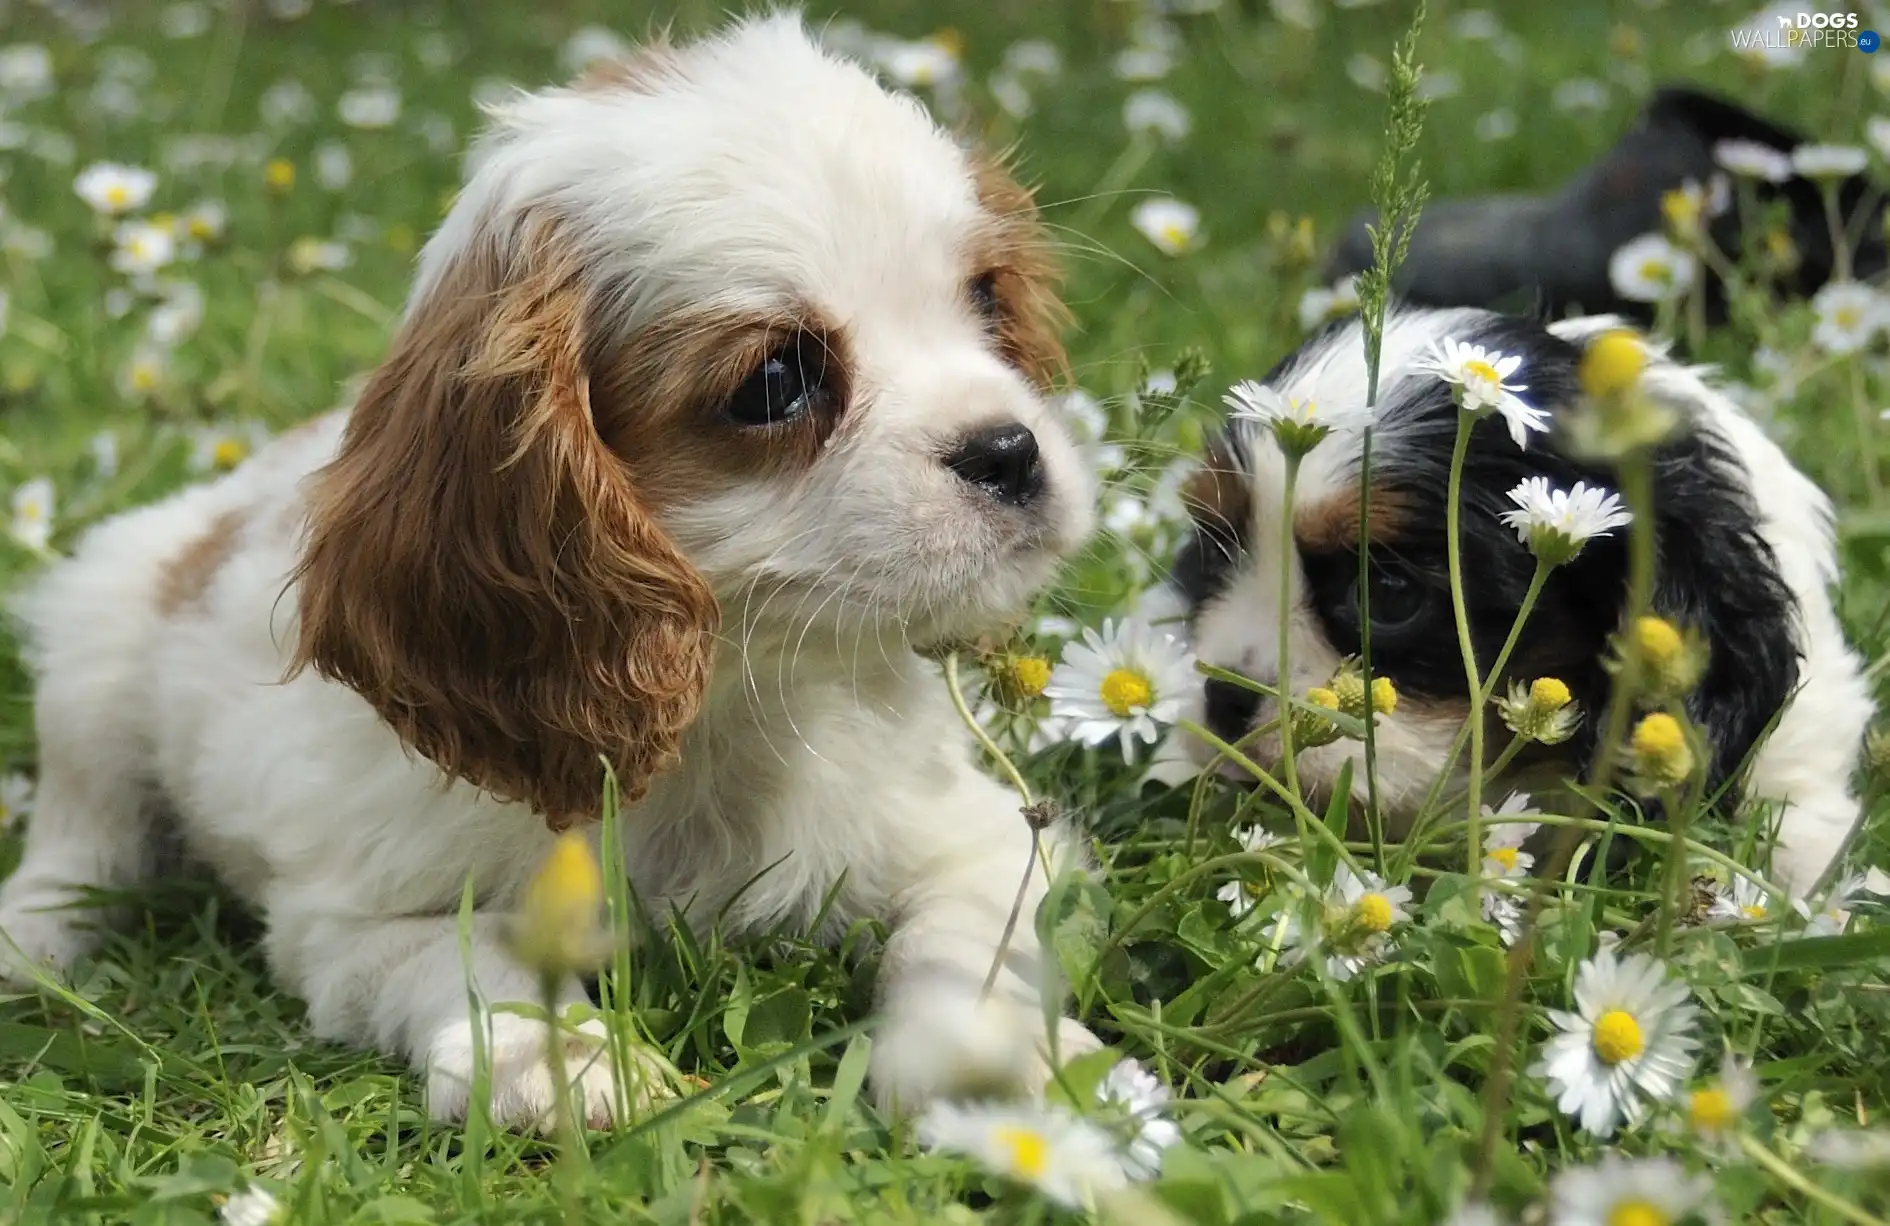 Flowers, grass, Two cars, Puppies